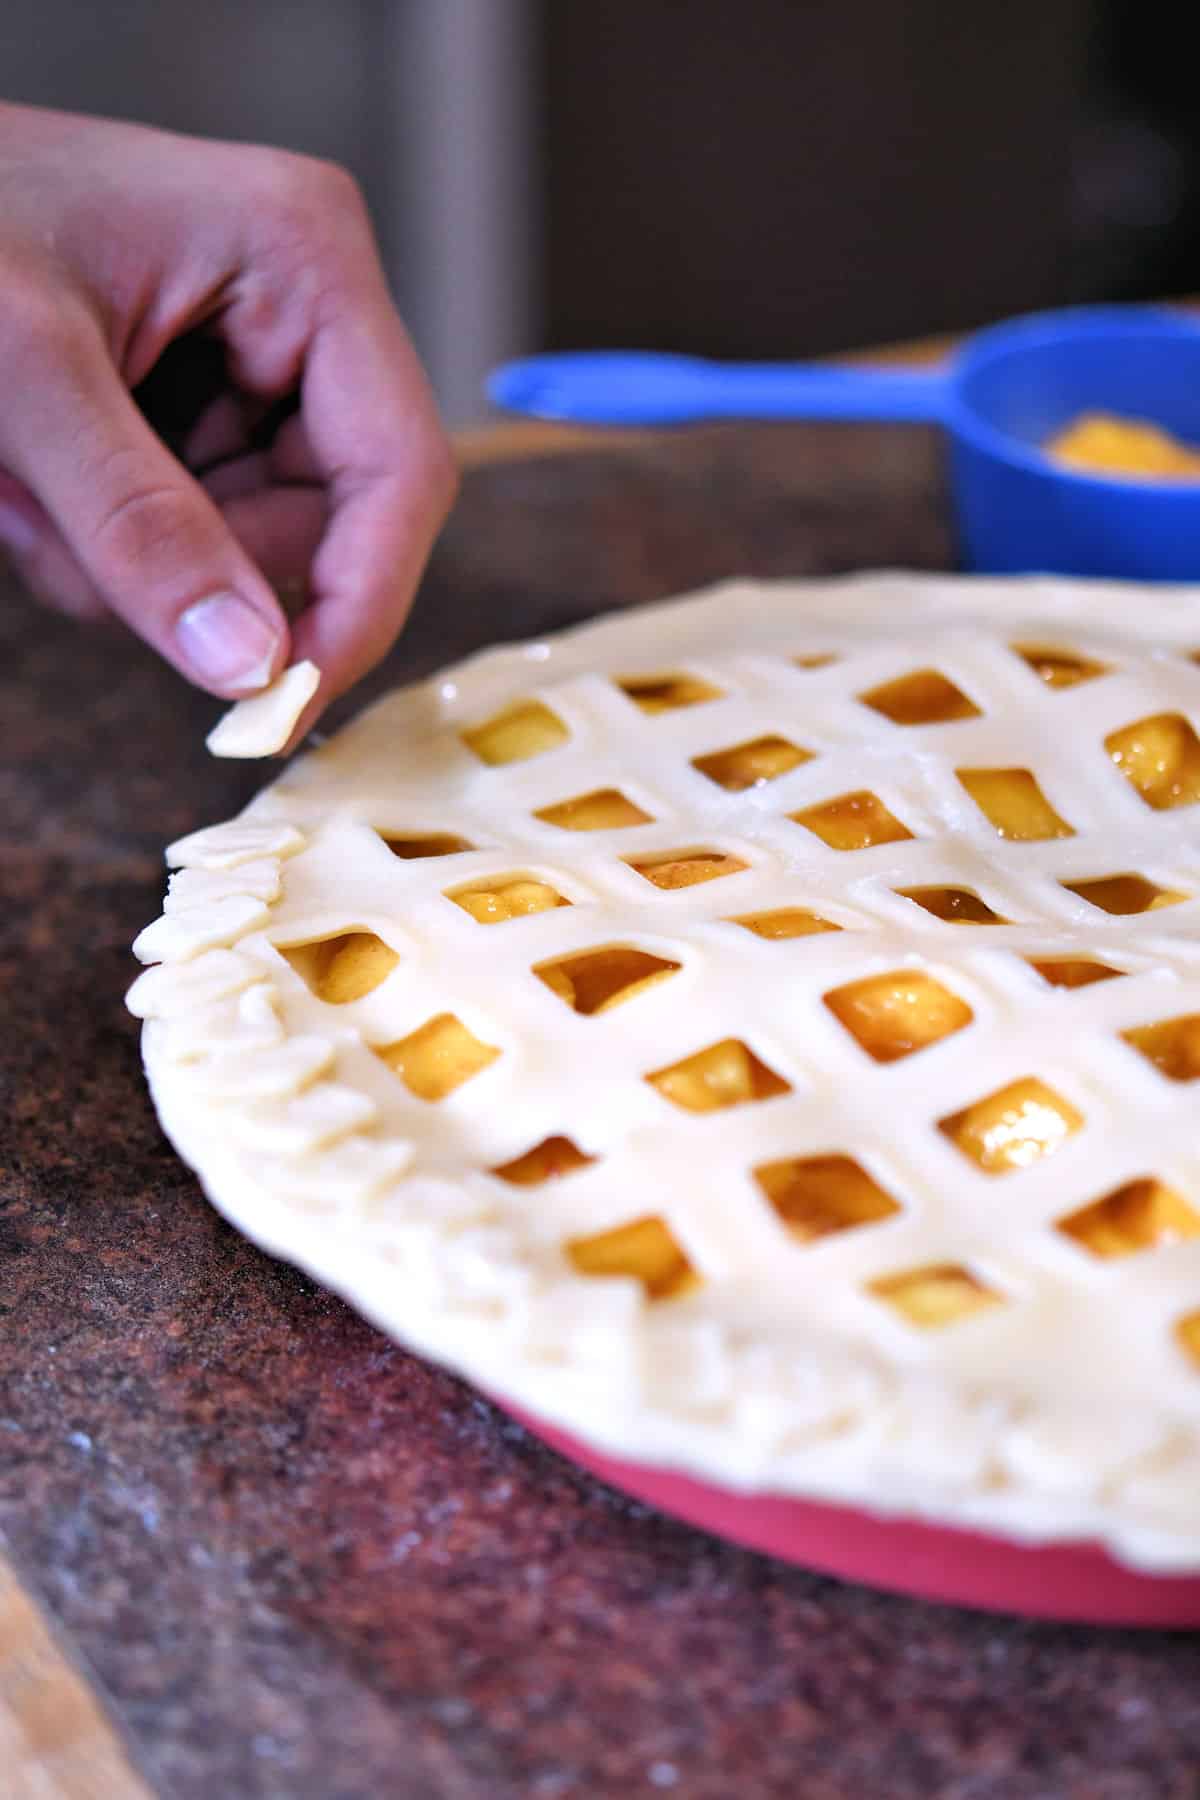 attaching small pieces of dough to the edge of the pie as decorative bits